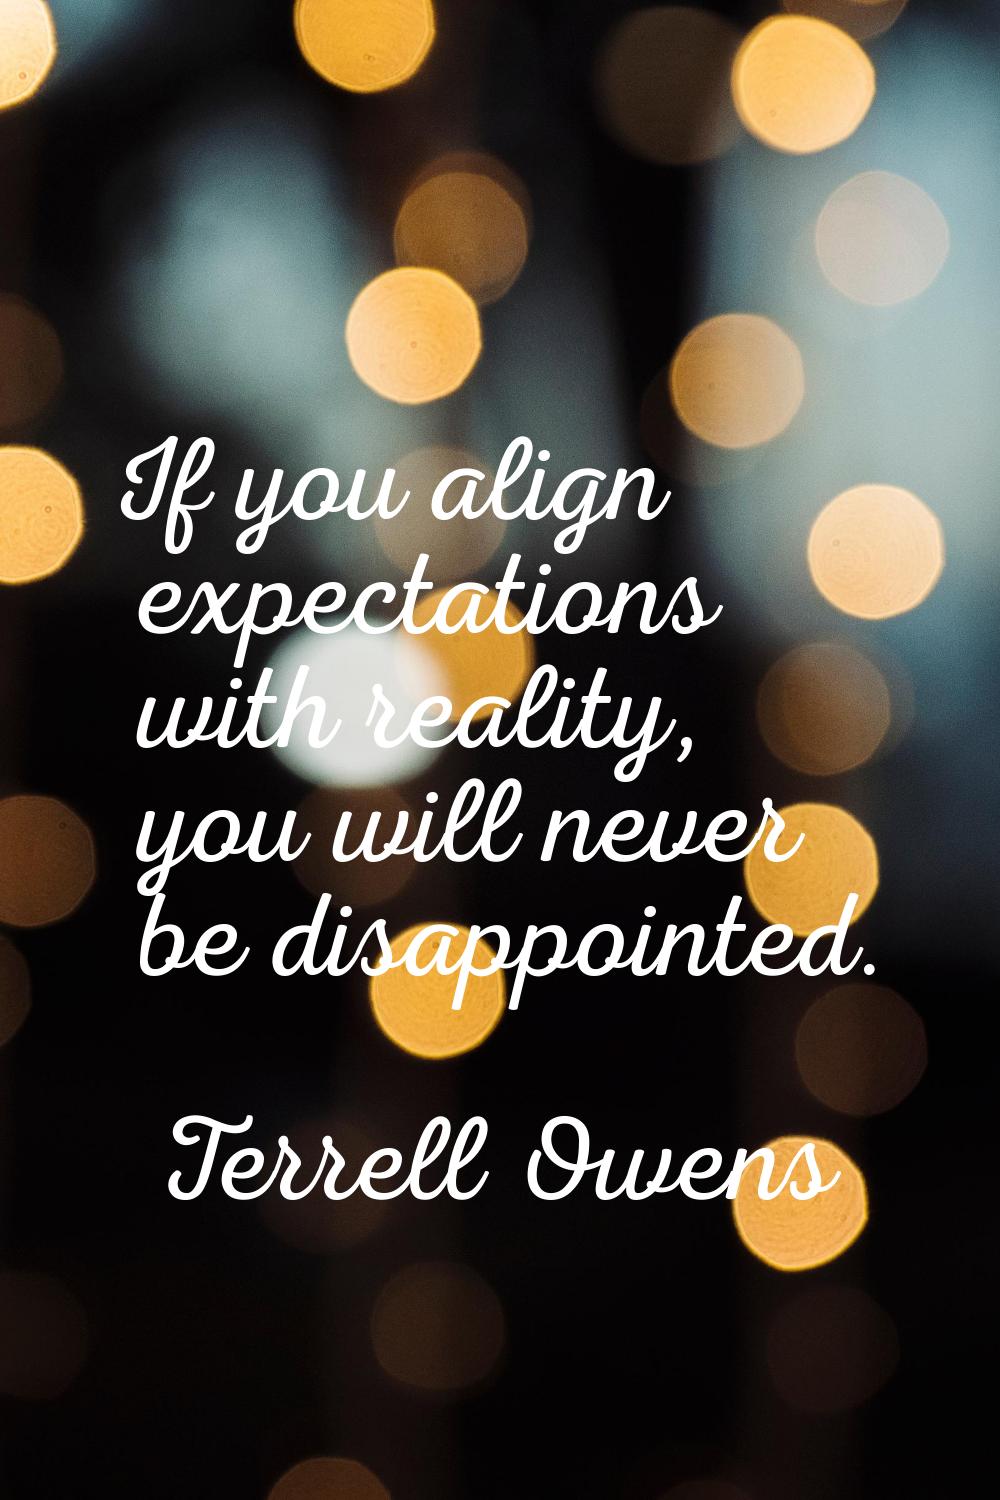 If you align expectations with reality, you will never be disappointed.